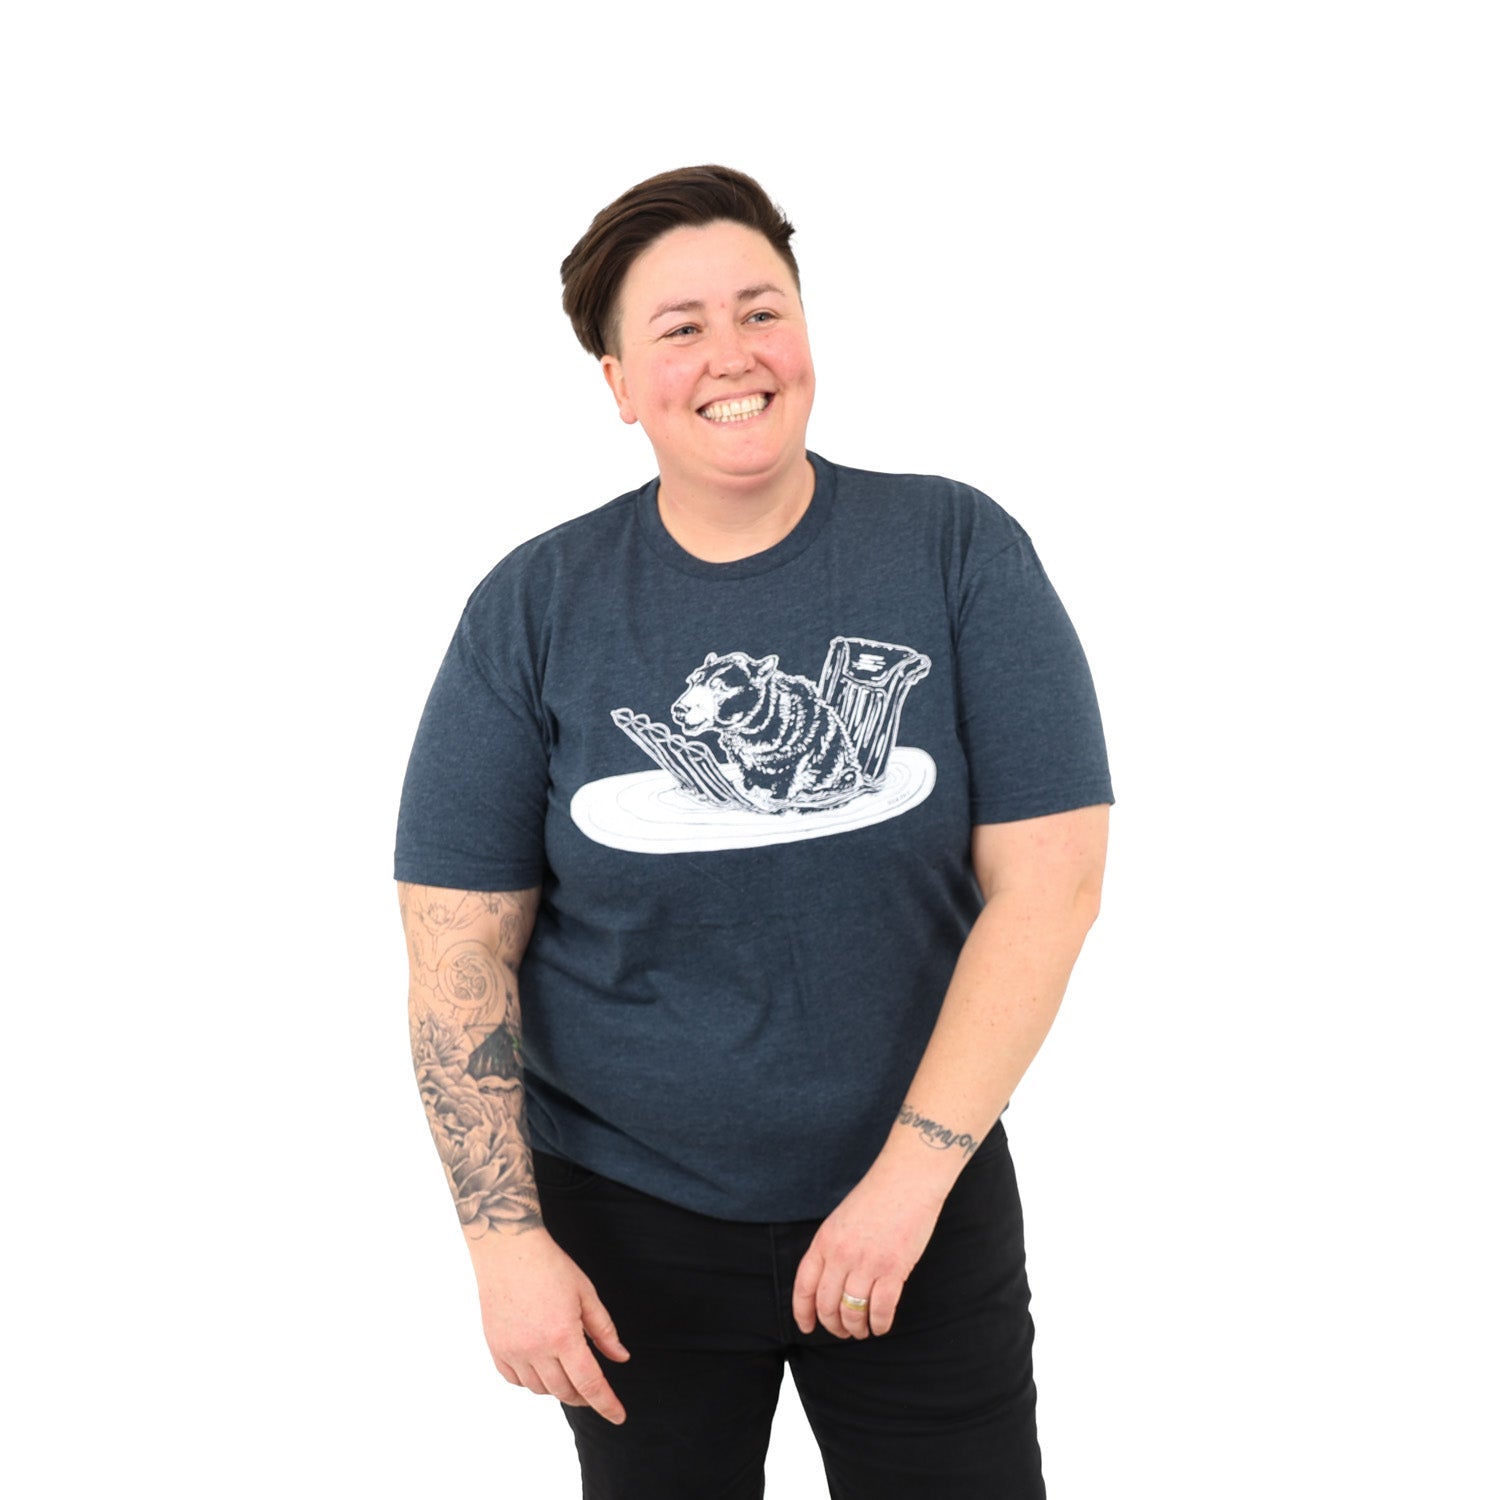 Woman with short dark hair wearing a blue t shirt screen printed with a bear sitting on a floatie in the water.